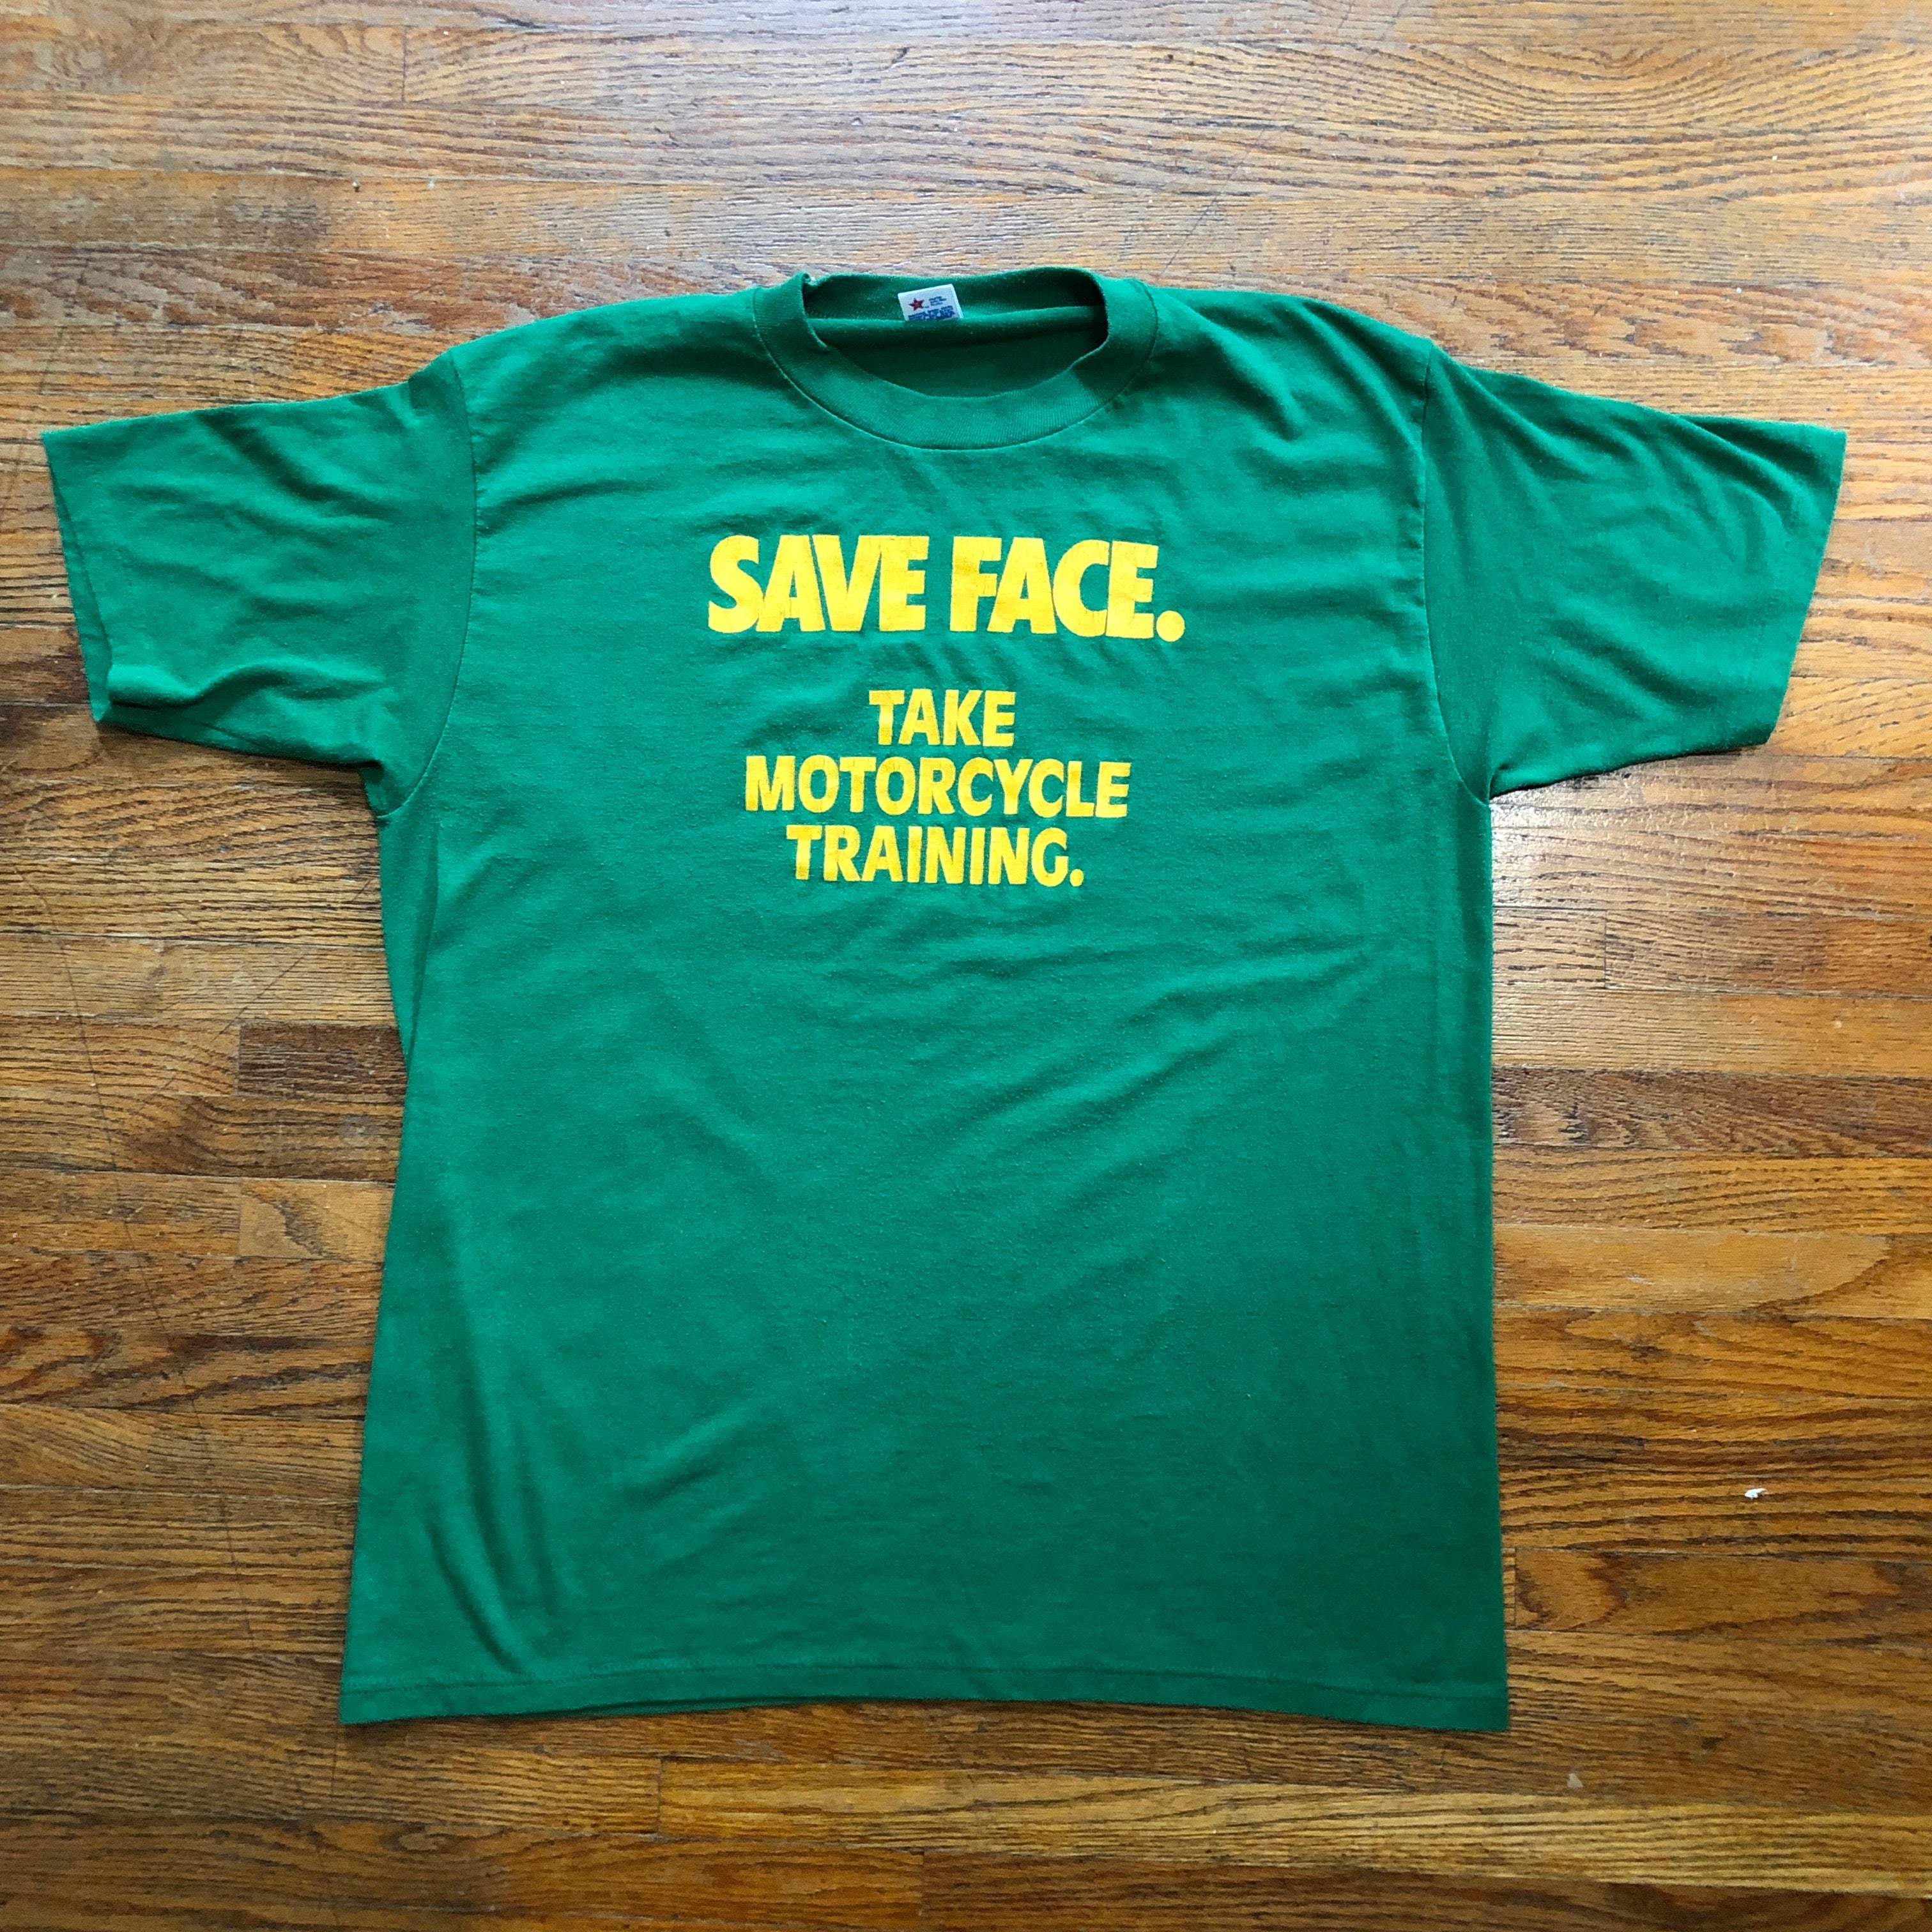 Vintage Motorcycle Safety Training T Shirt from 1980s - XL - Save Face - John Deere Colors - Green Yellow - Jerzees - Polyester Cotton